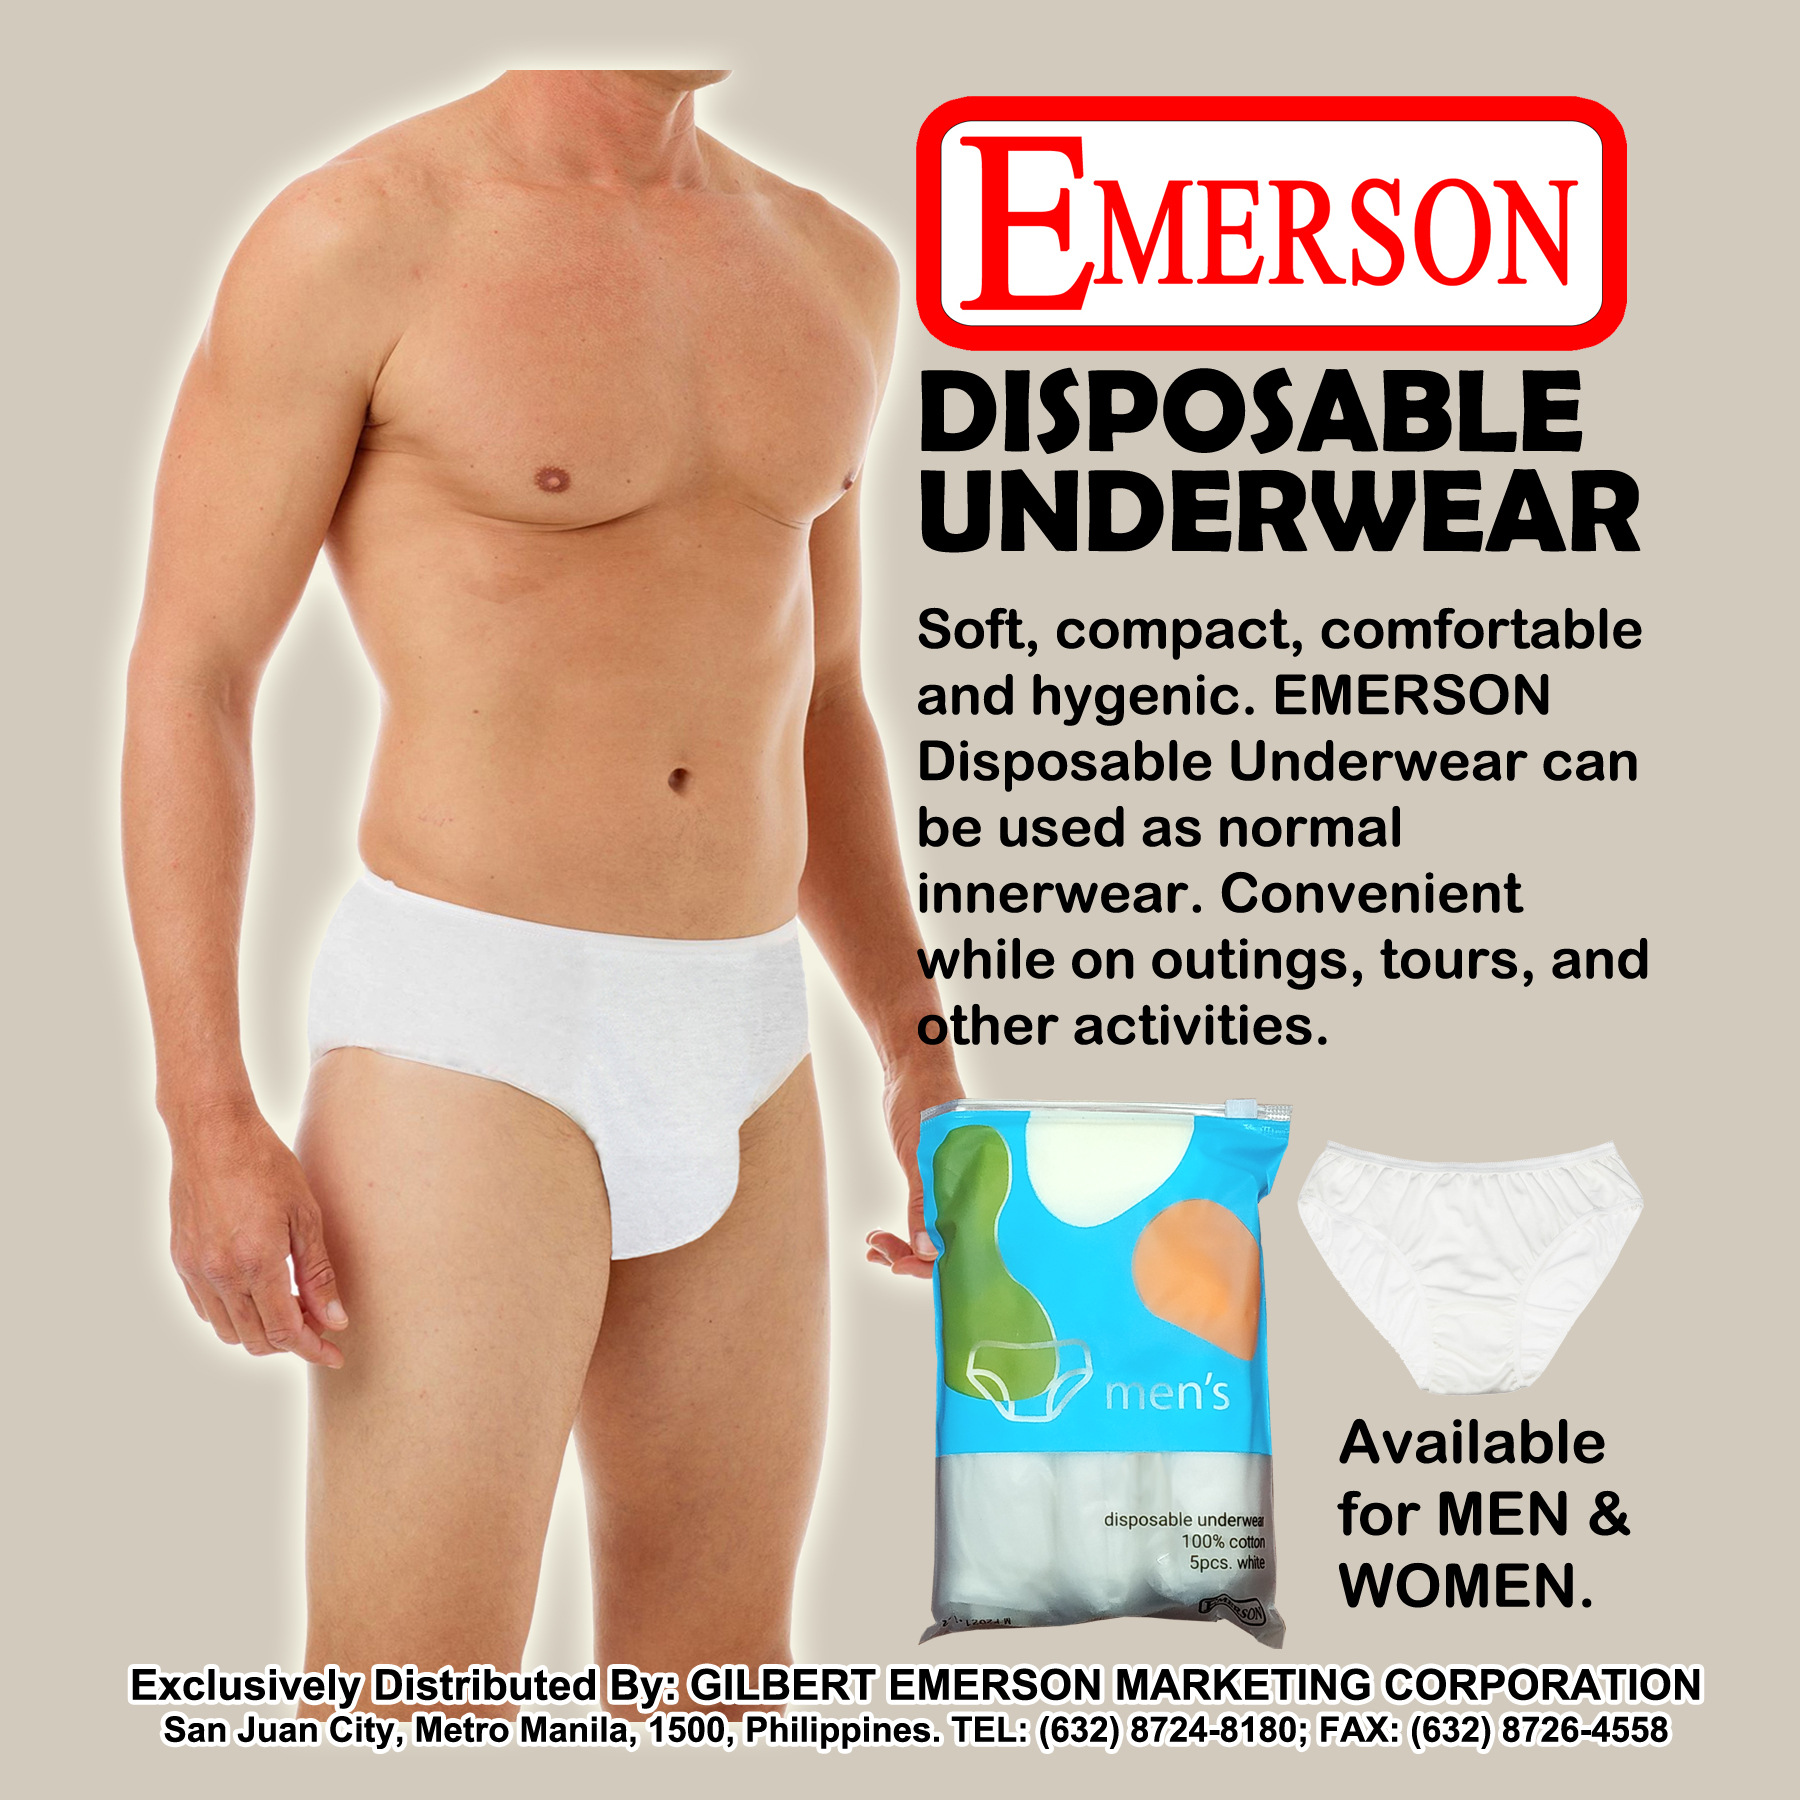 WATSONS Extra Comfort Disposable Underwear for Men Size XL (Cotton